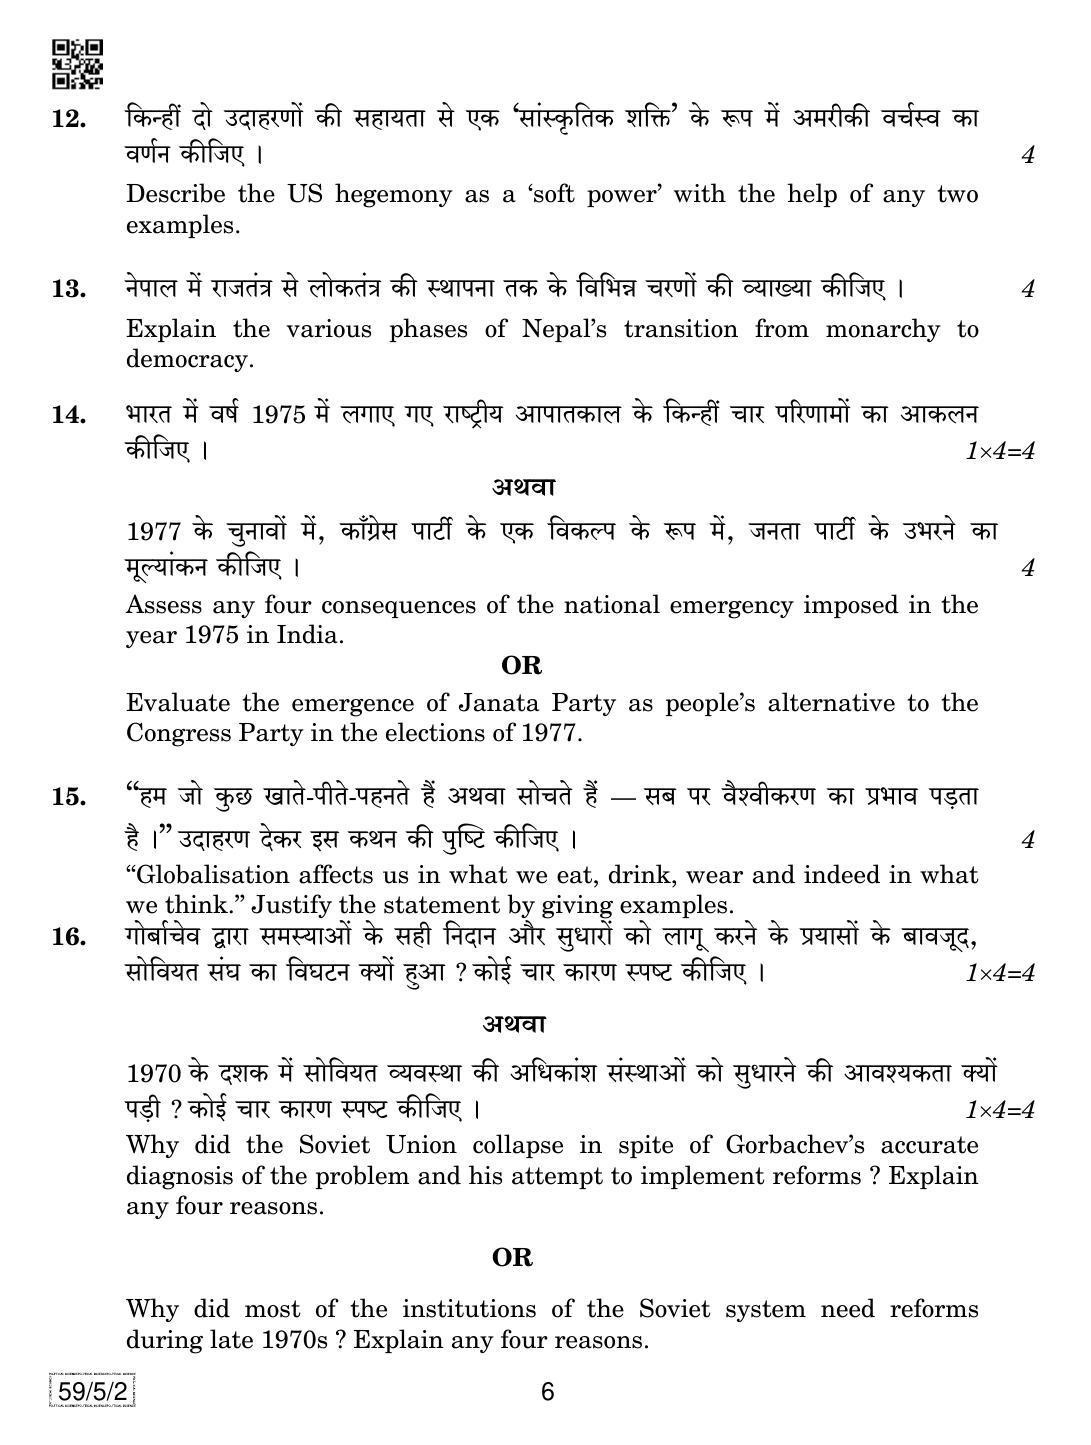 CBSE Class 12 59-5-2 Political Science 2019 Question Paper - Page 6